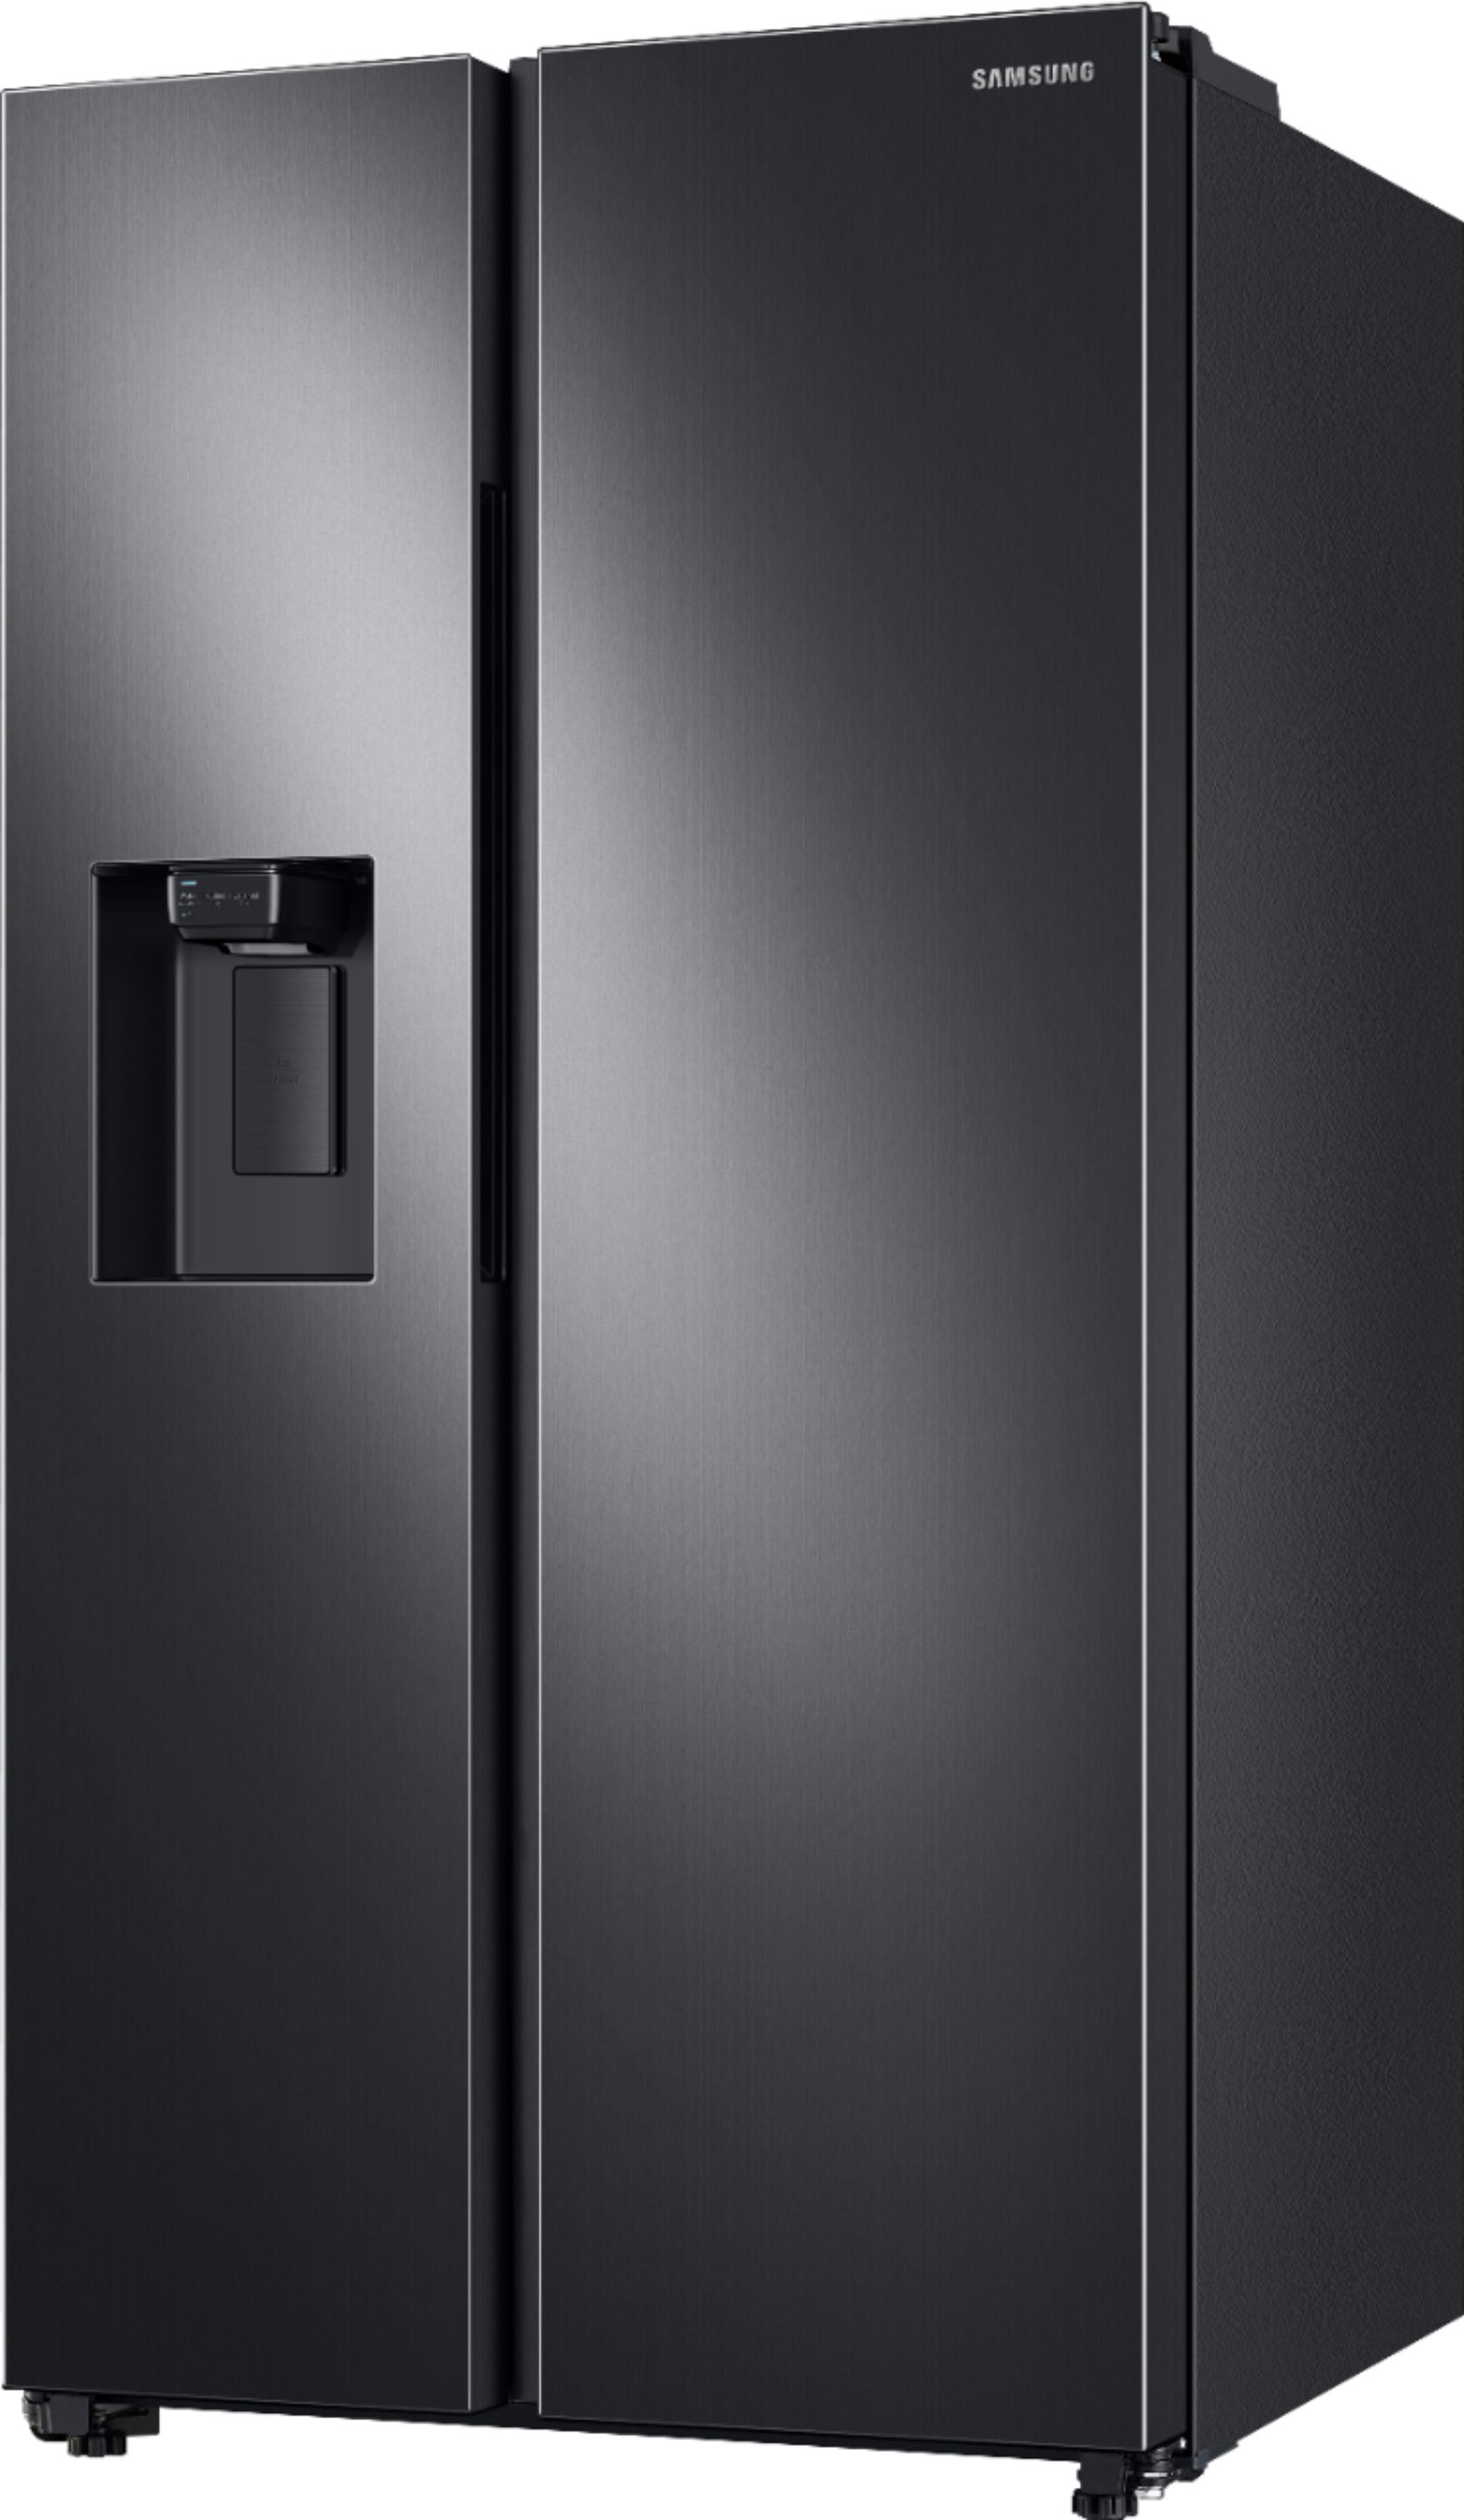 Left View: Samsung - 27.4 cu. ft. Side-by-Side Refrigerator with Large Capacity - Black Stainless Steel